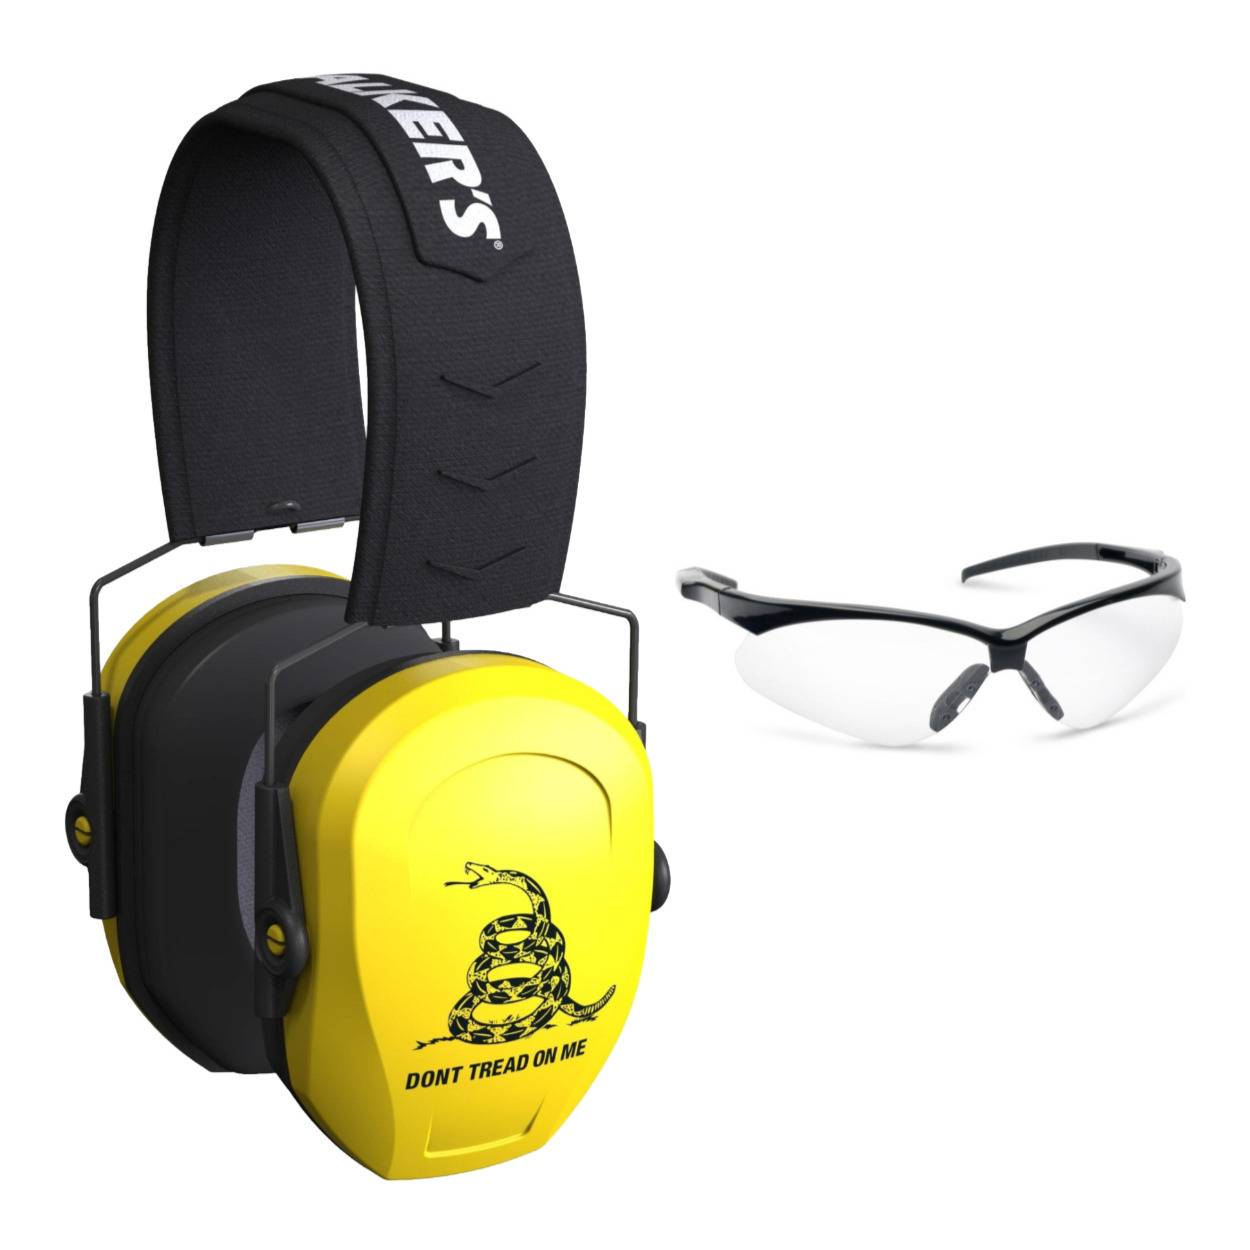 Walker's Razor Slim Passive Safety Ear Muffs (Yellow, Don't Tread On Me) with Shooting Glasses